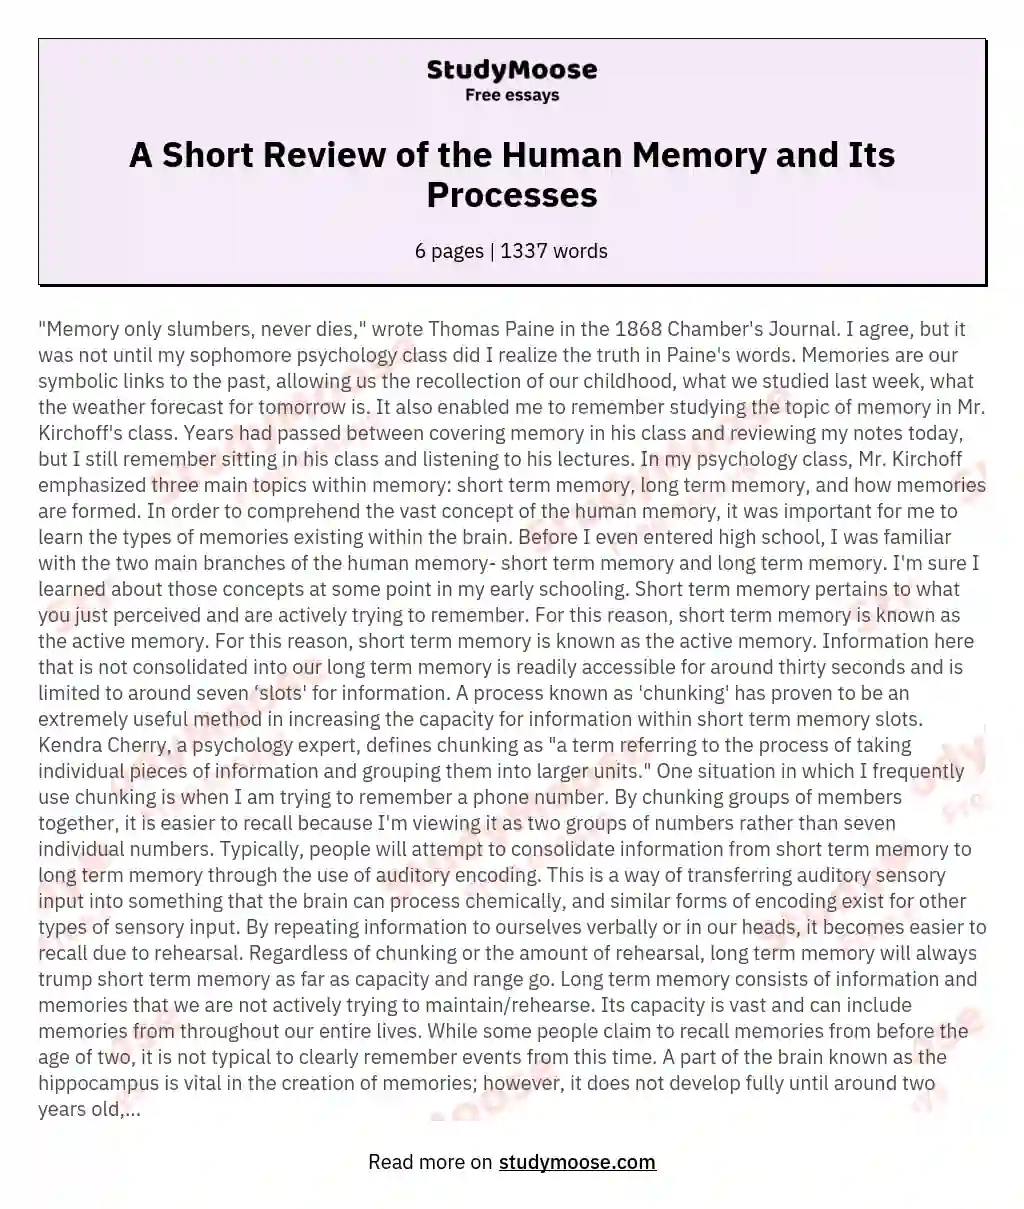 A Short Review of the Human Memory and Its Processes essay